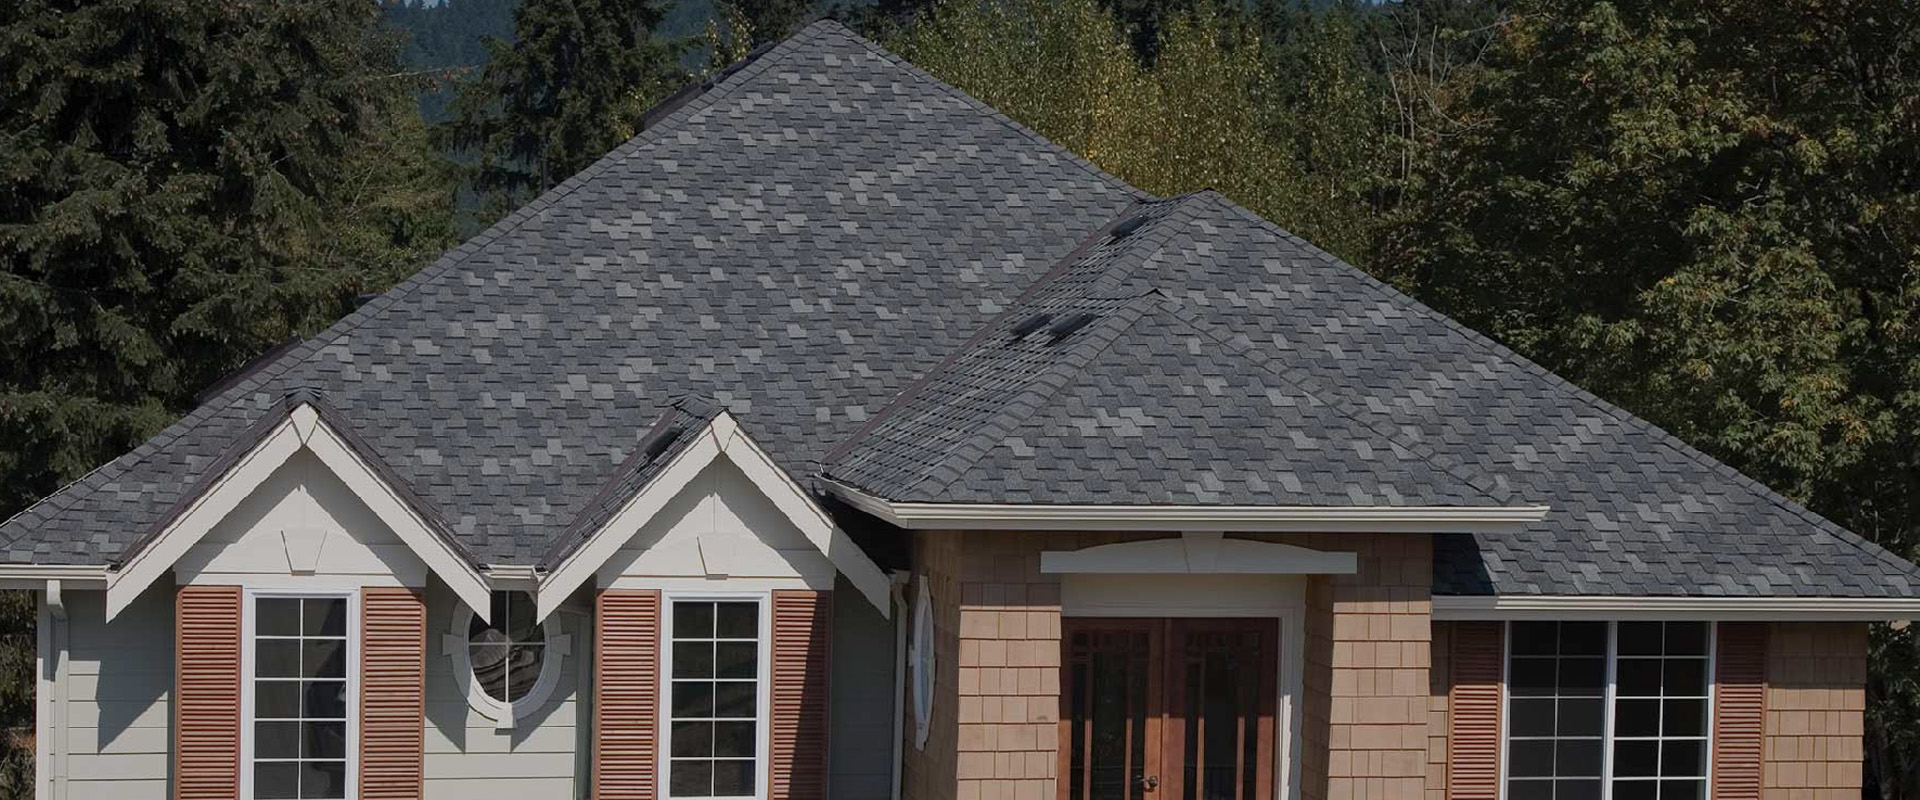 Why You Should Schedule Roof Inspections During Spring